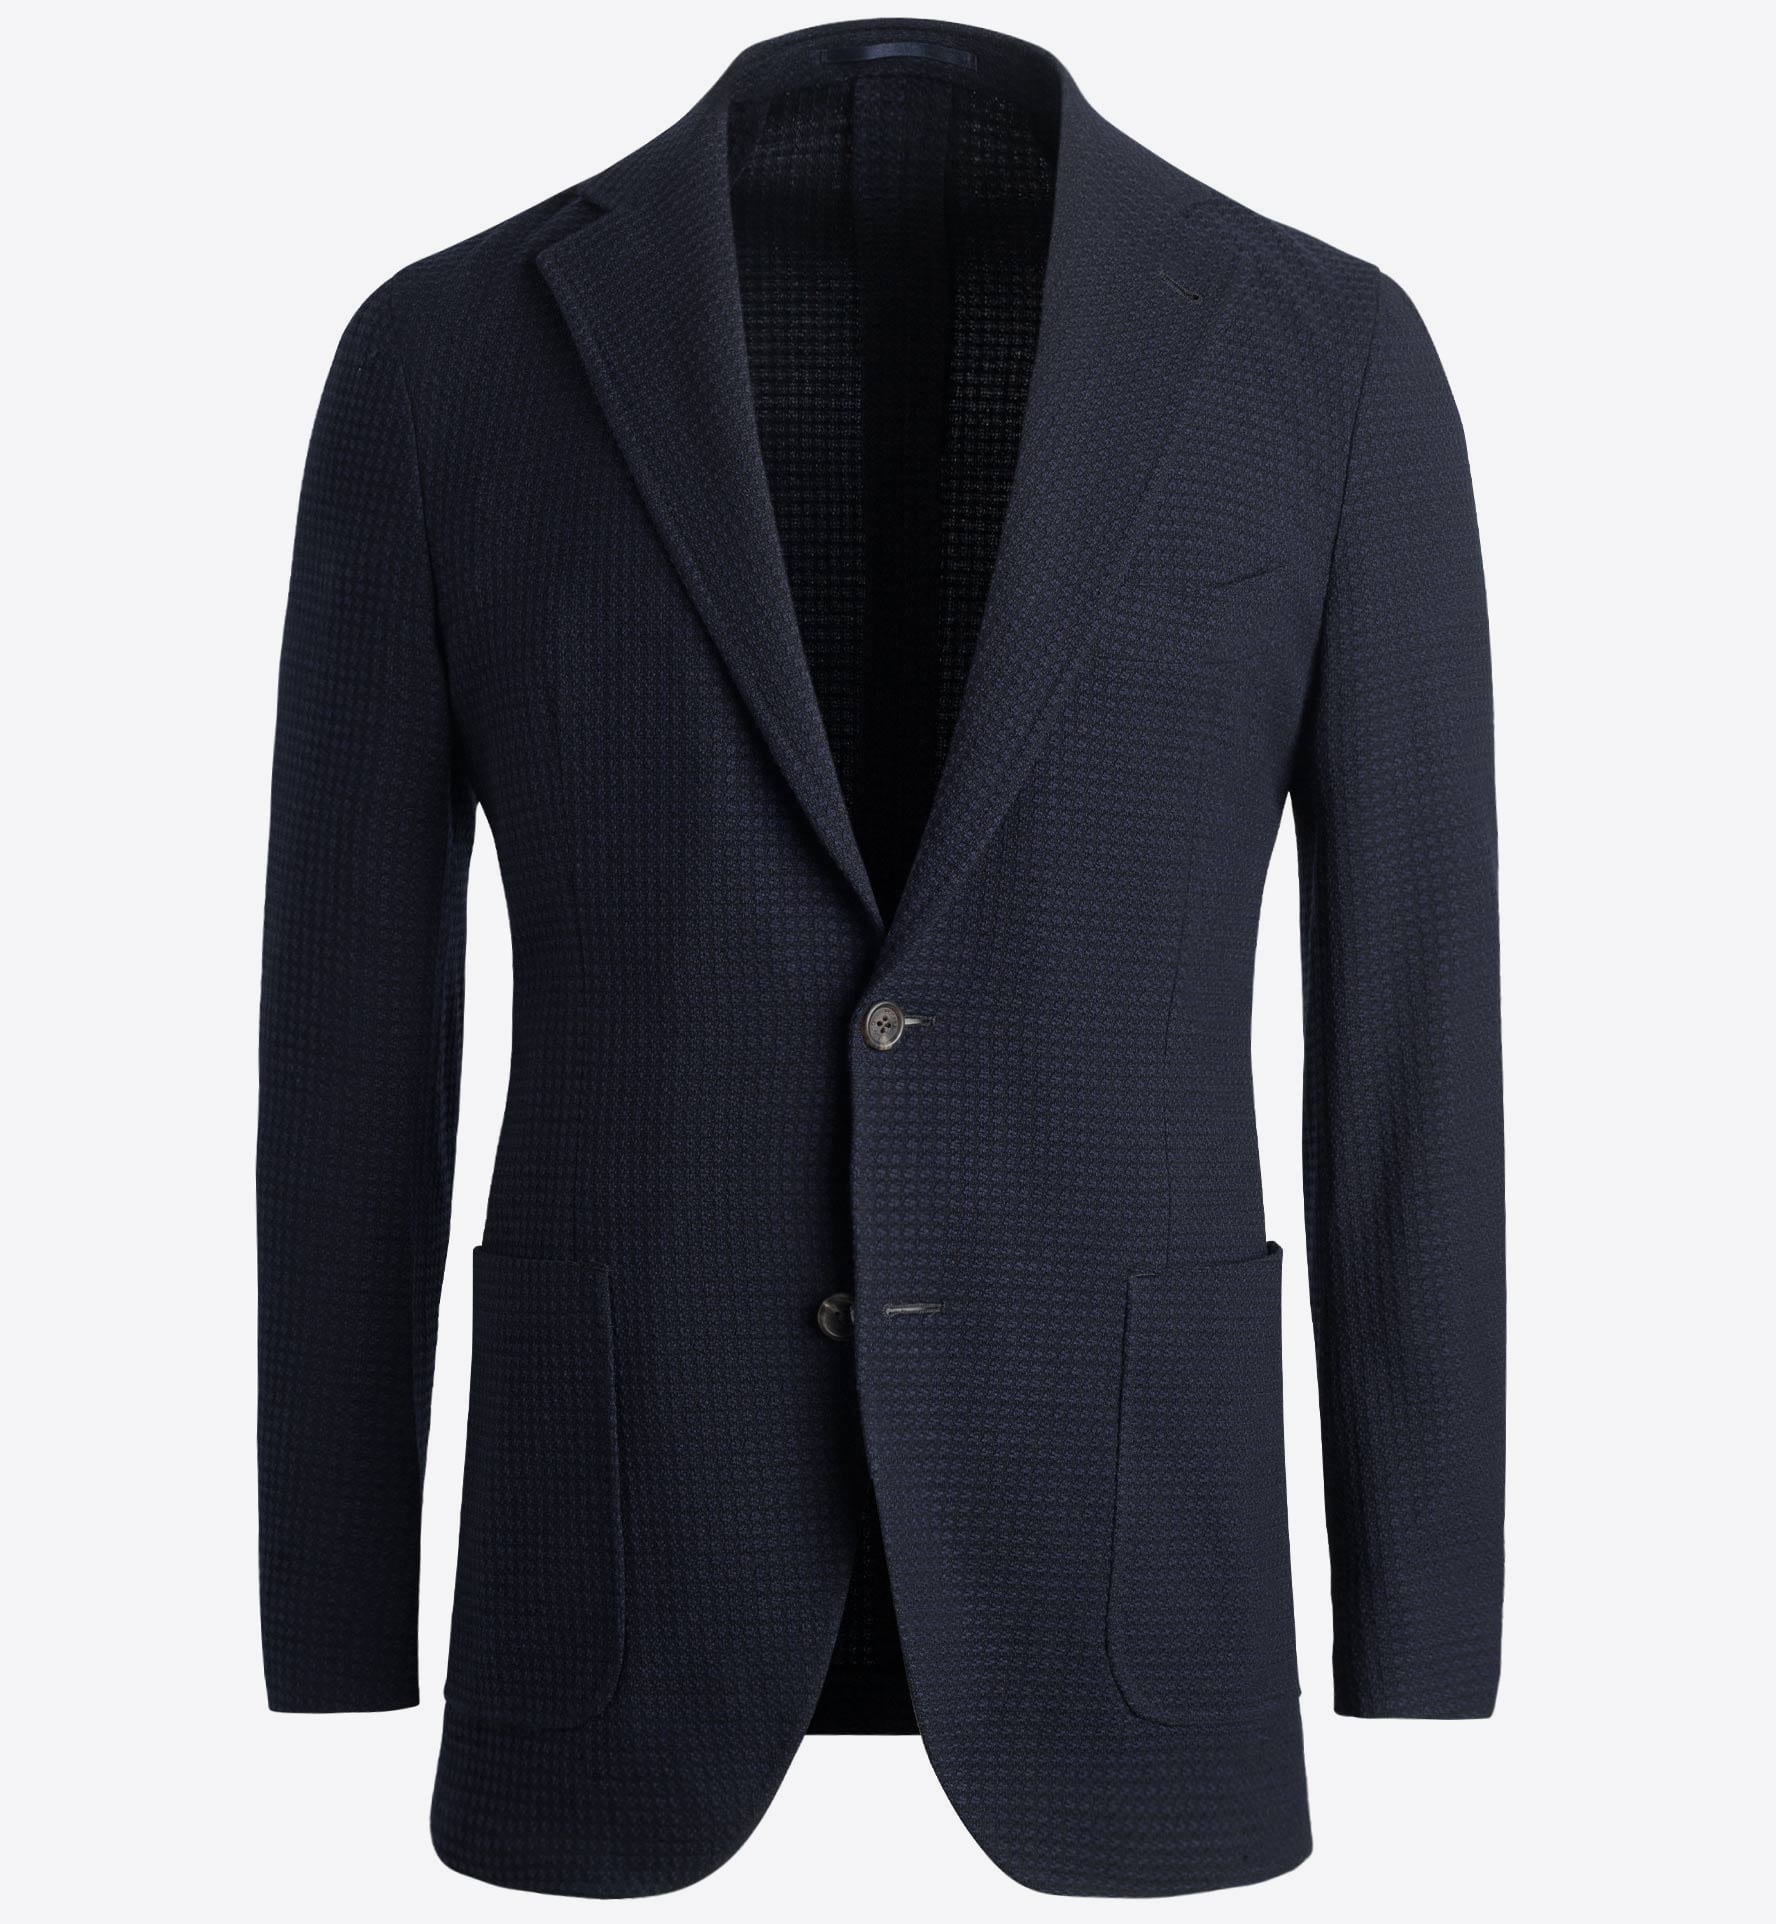 Zoom Image of Waverly Navy Textured Stretch Wool Jacket